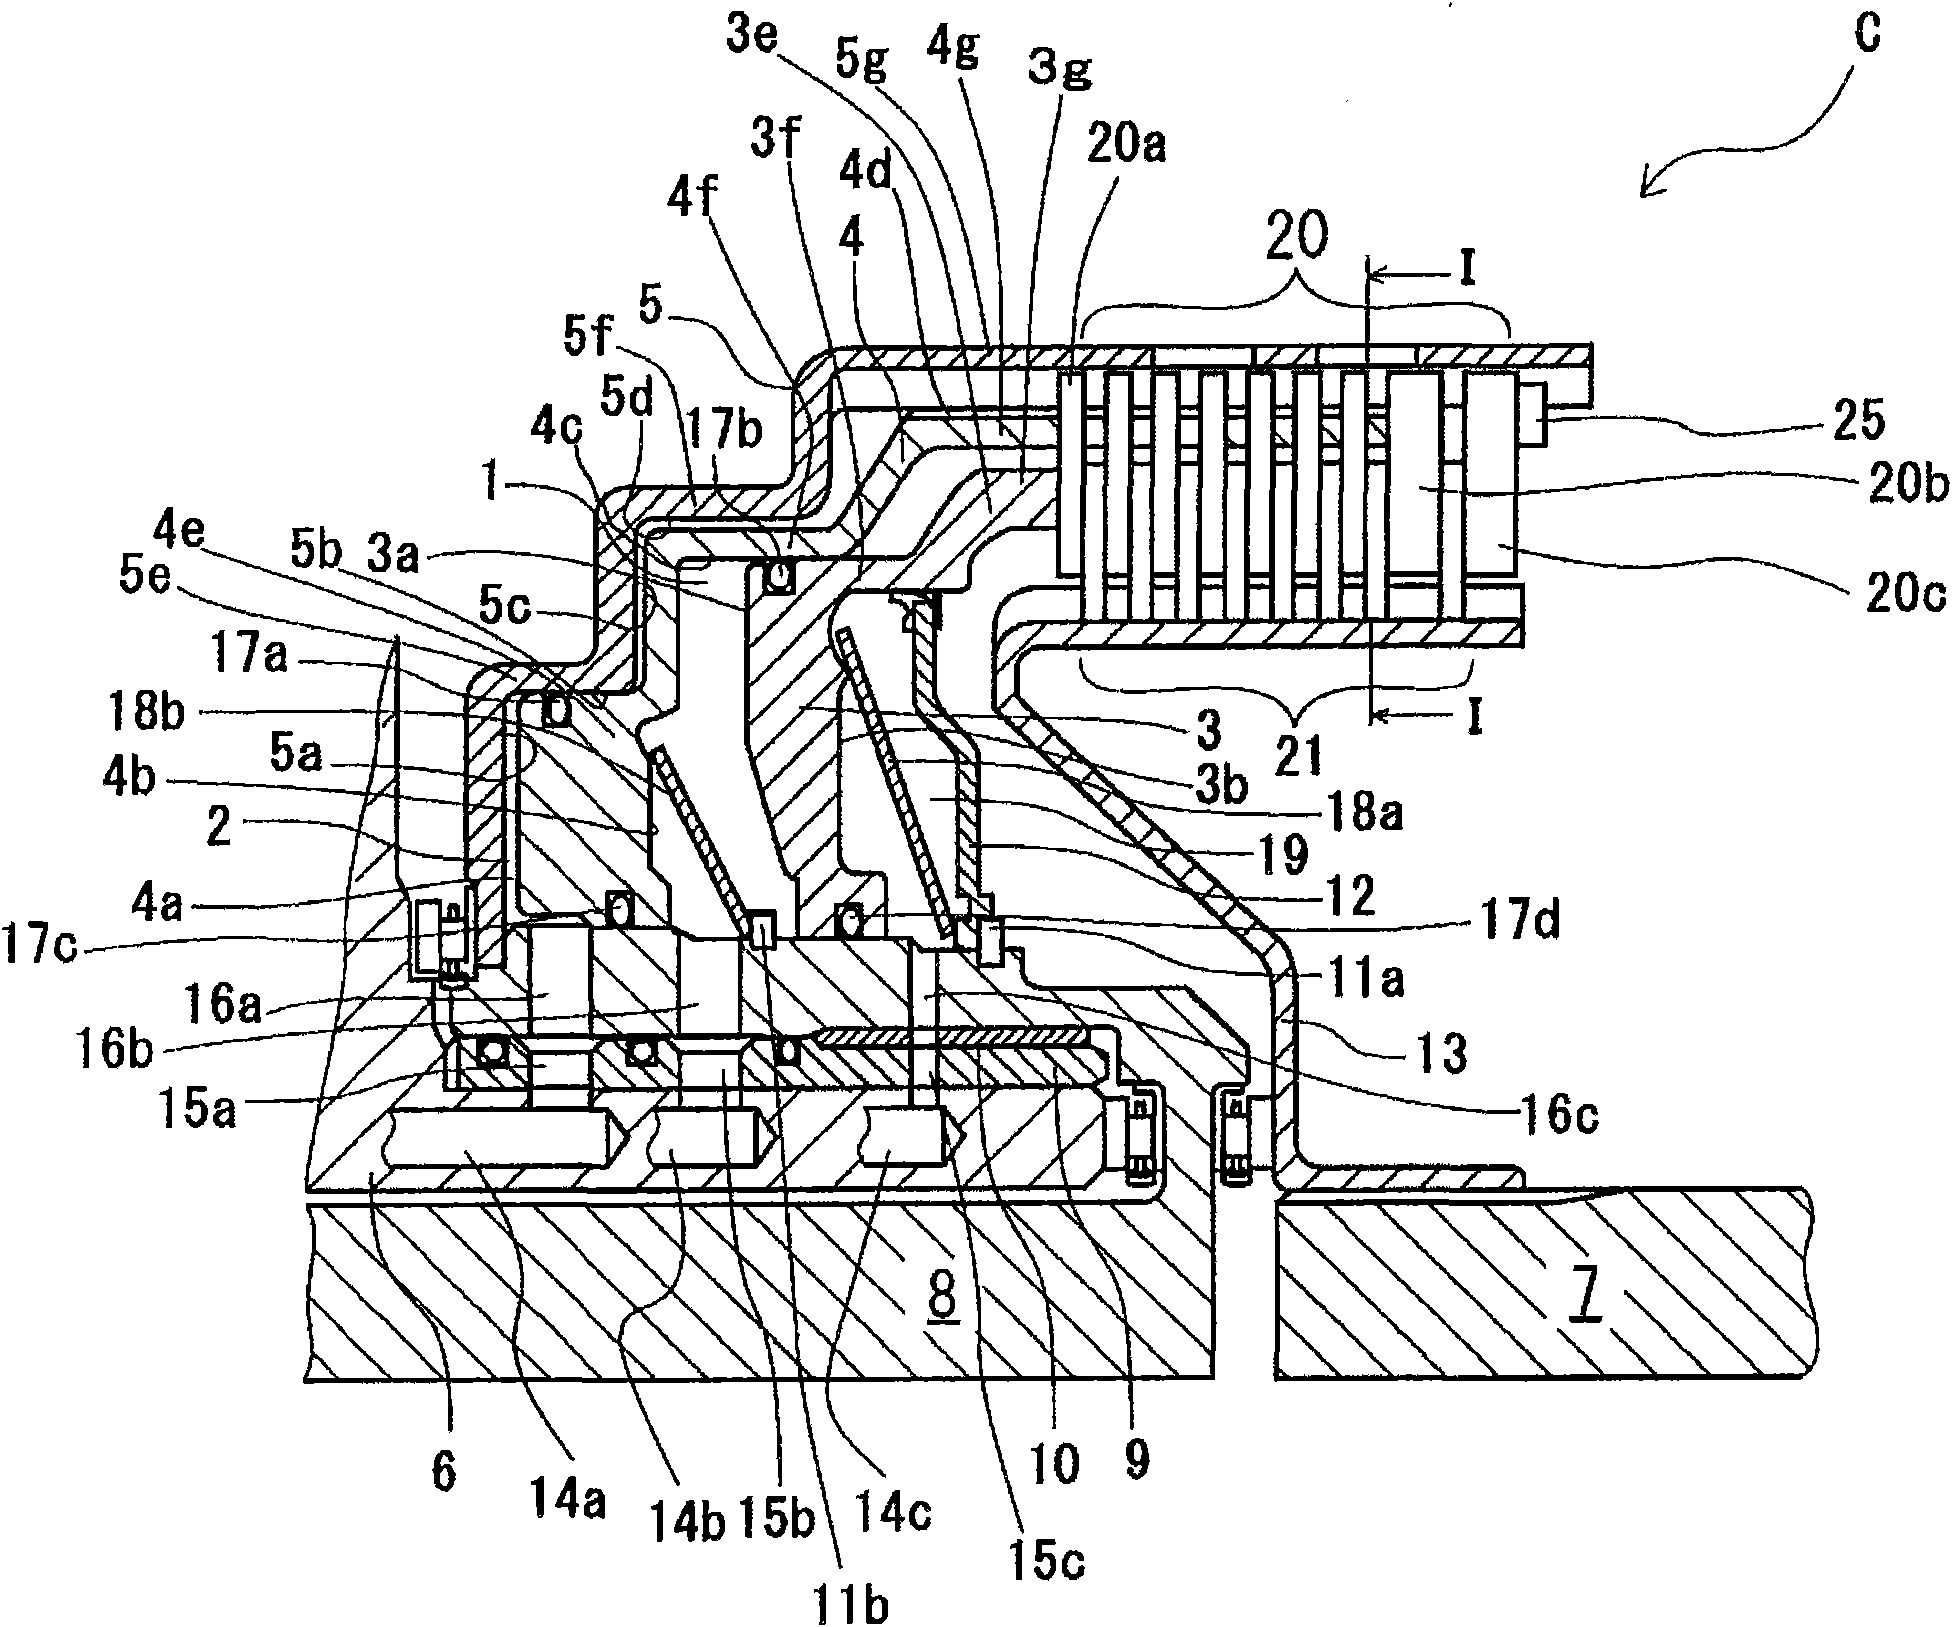 Multi-plate frictional element